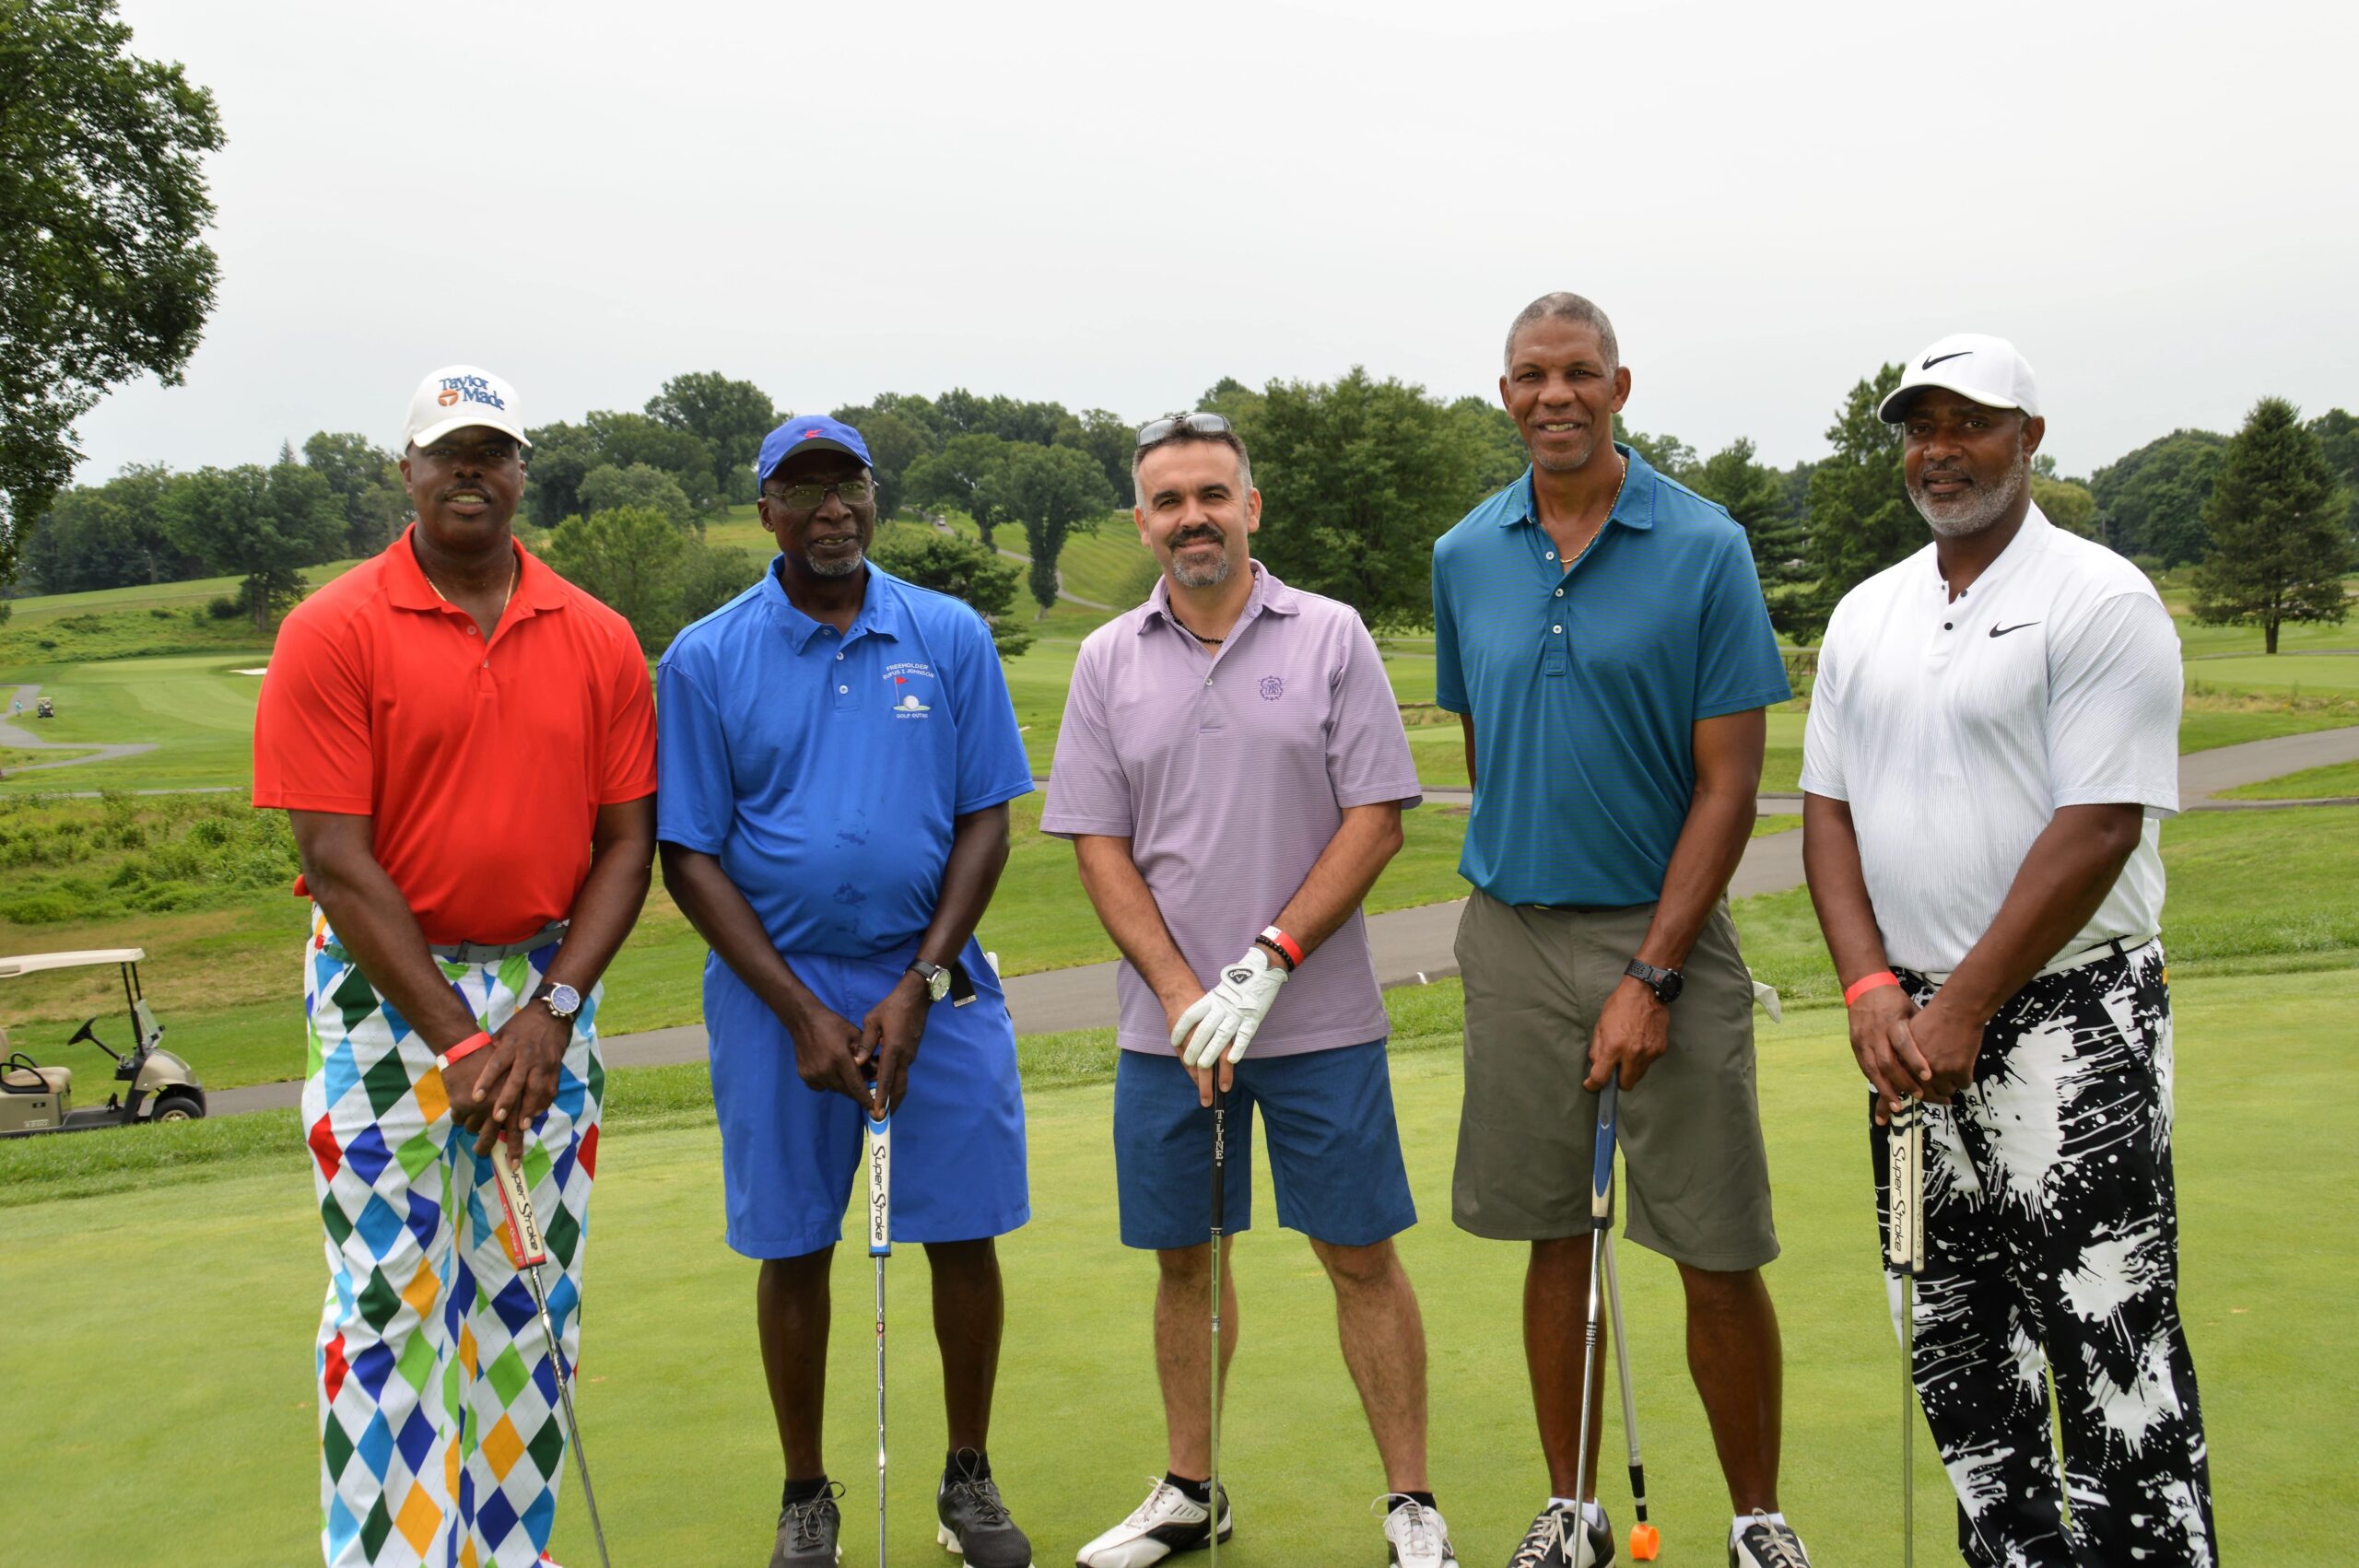 2018 GOLF OUTING – 125